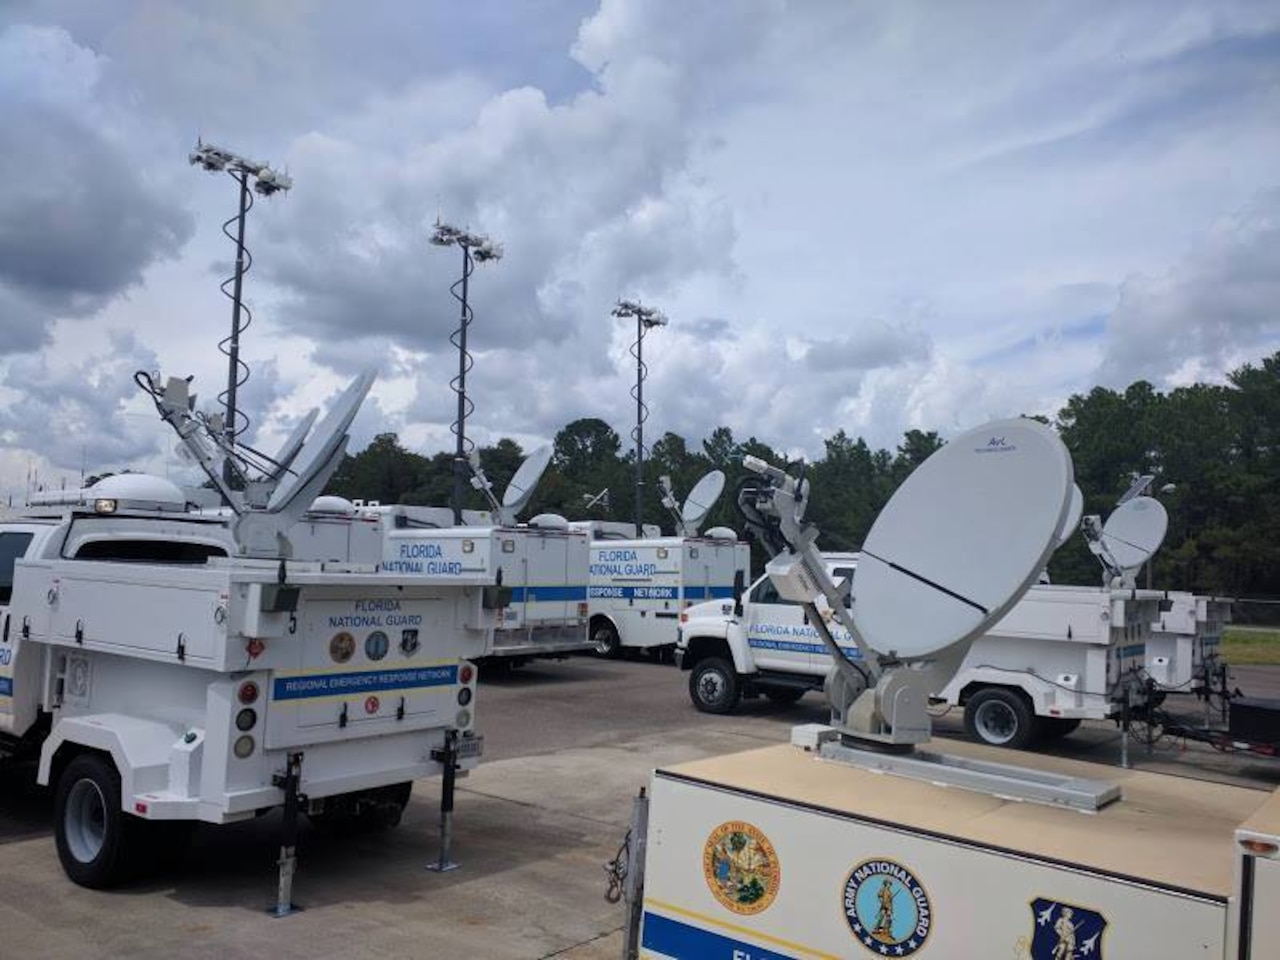 Florida National Guard satellite communications vehicles are gathered at a staging area